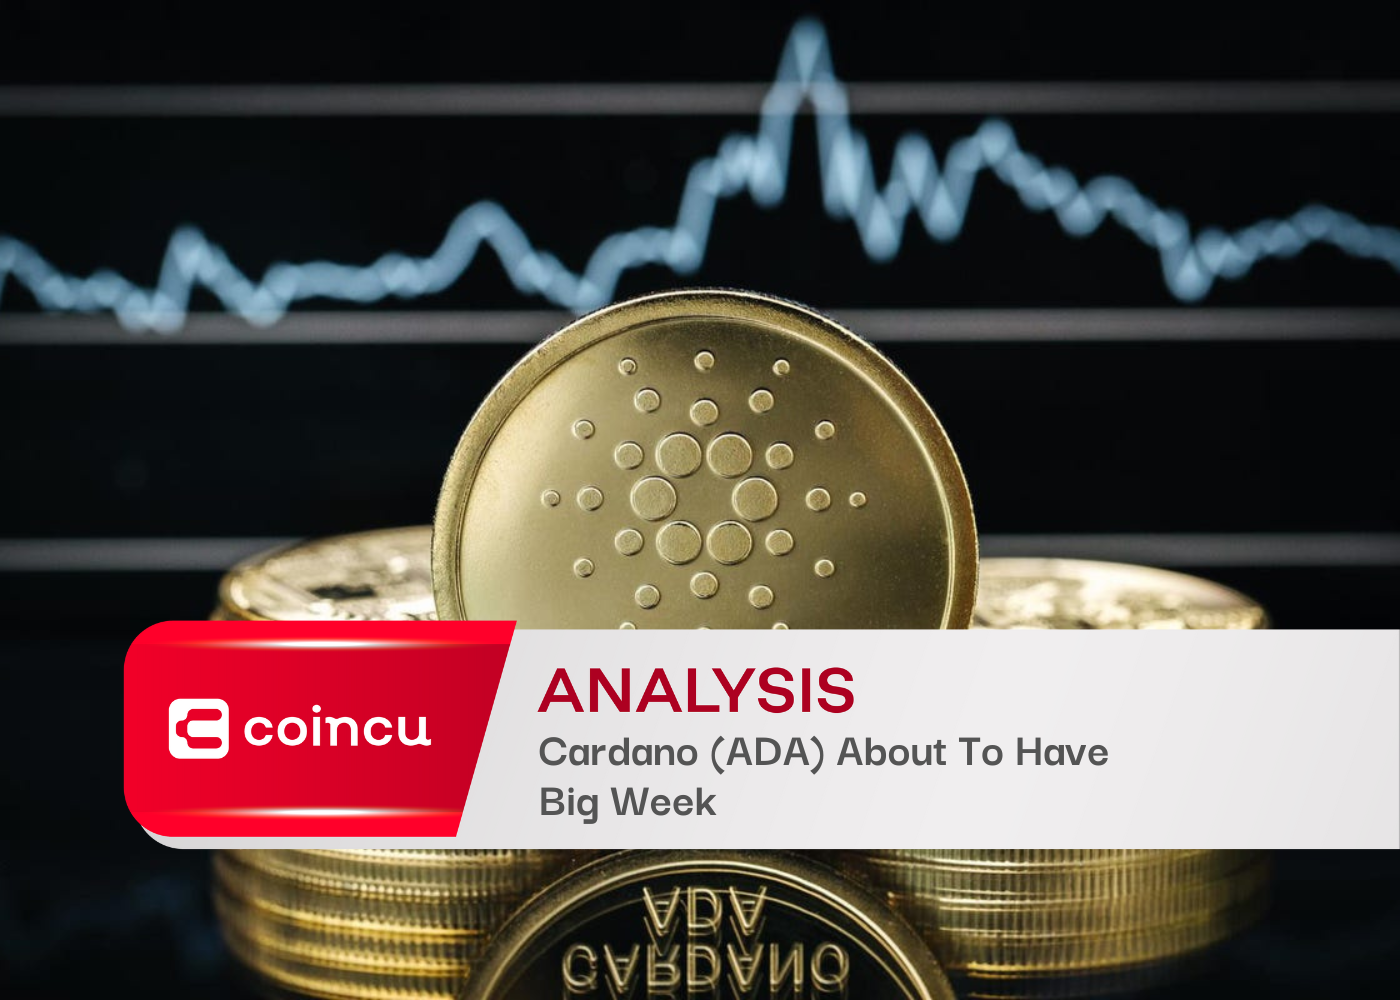 Cardano (ADA) About To Have Big Week - CoinCu News